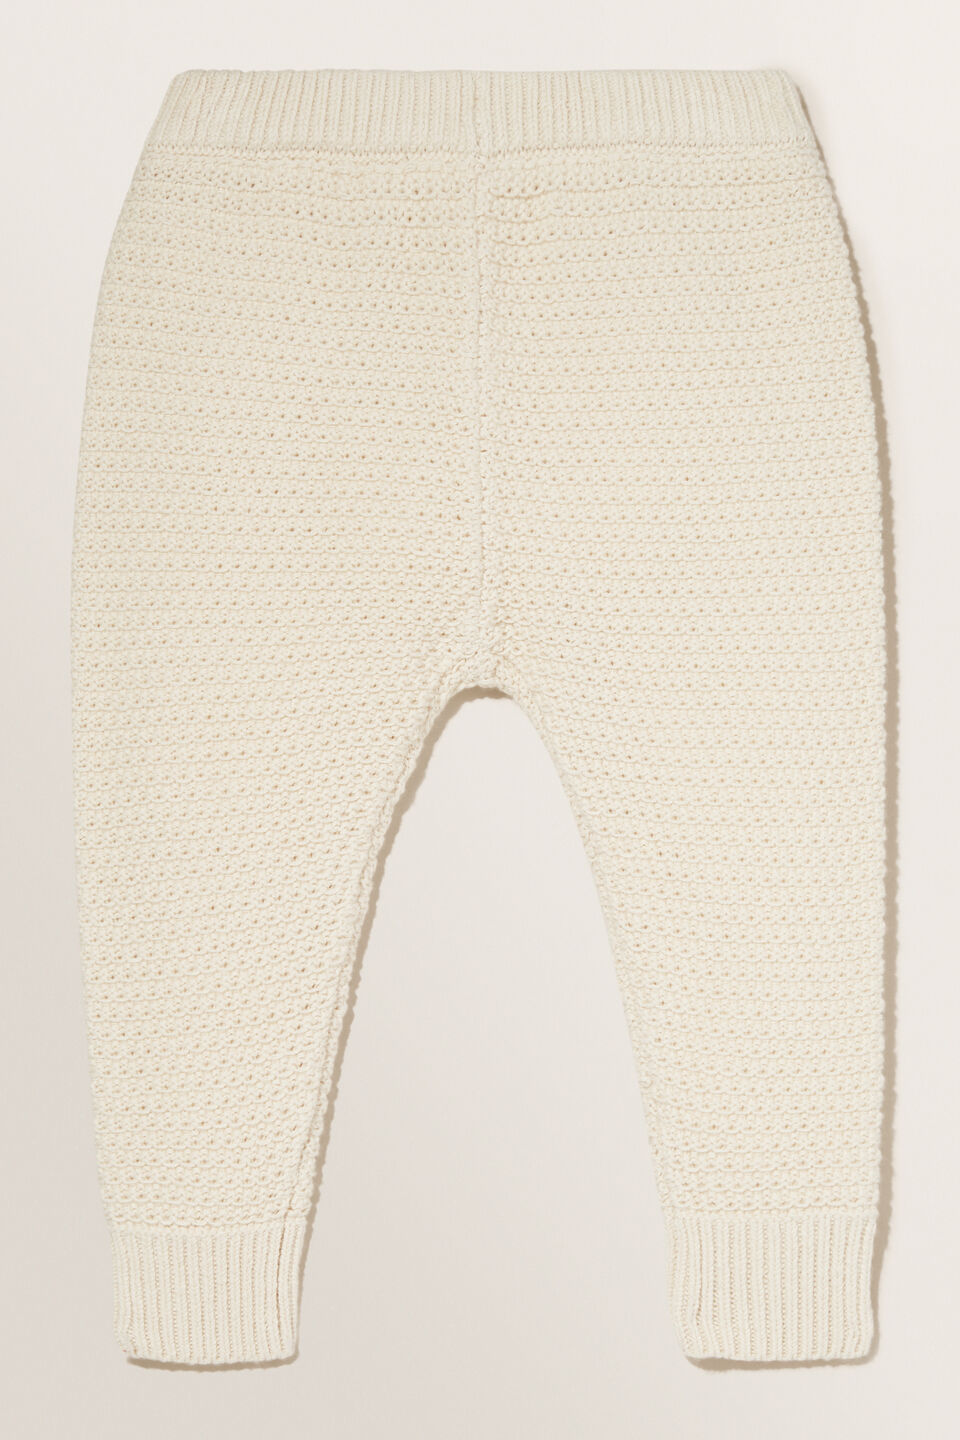 Knitted Stitch Pant  Rich Cream  hi-res